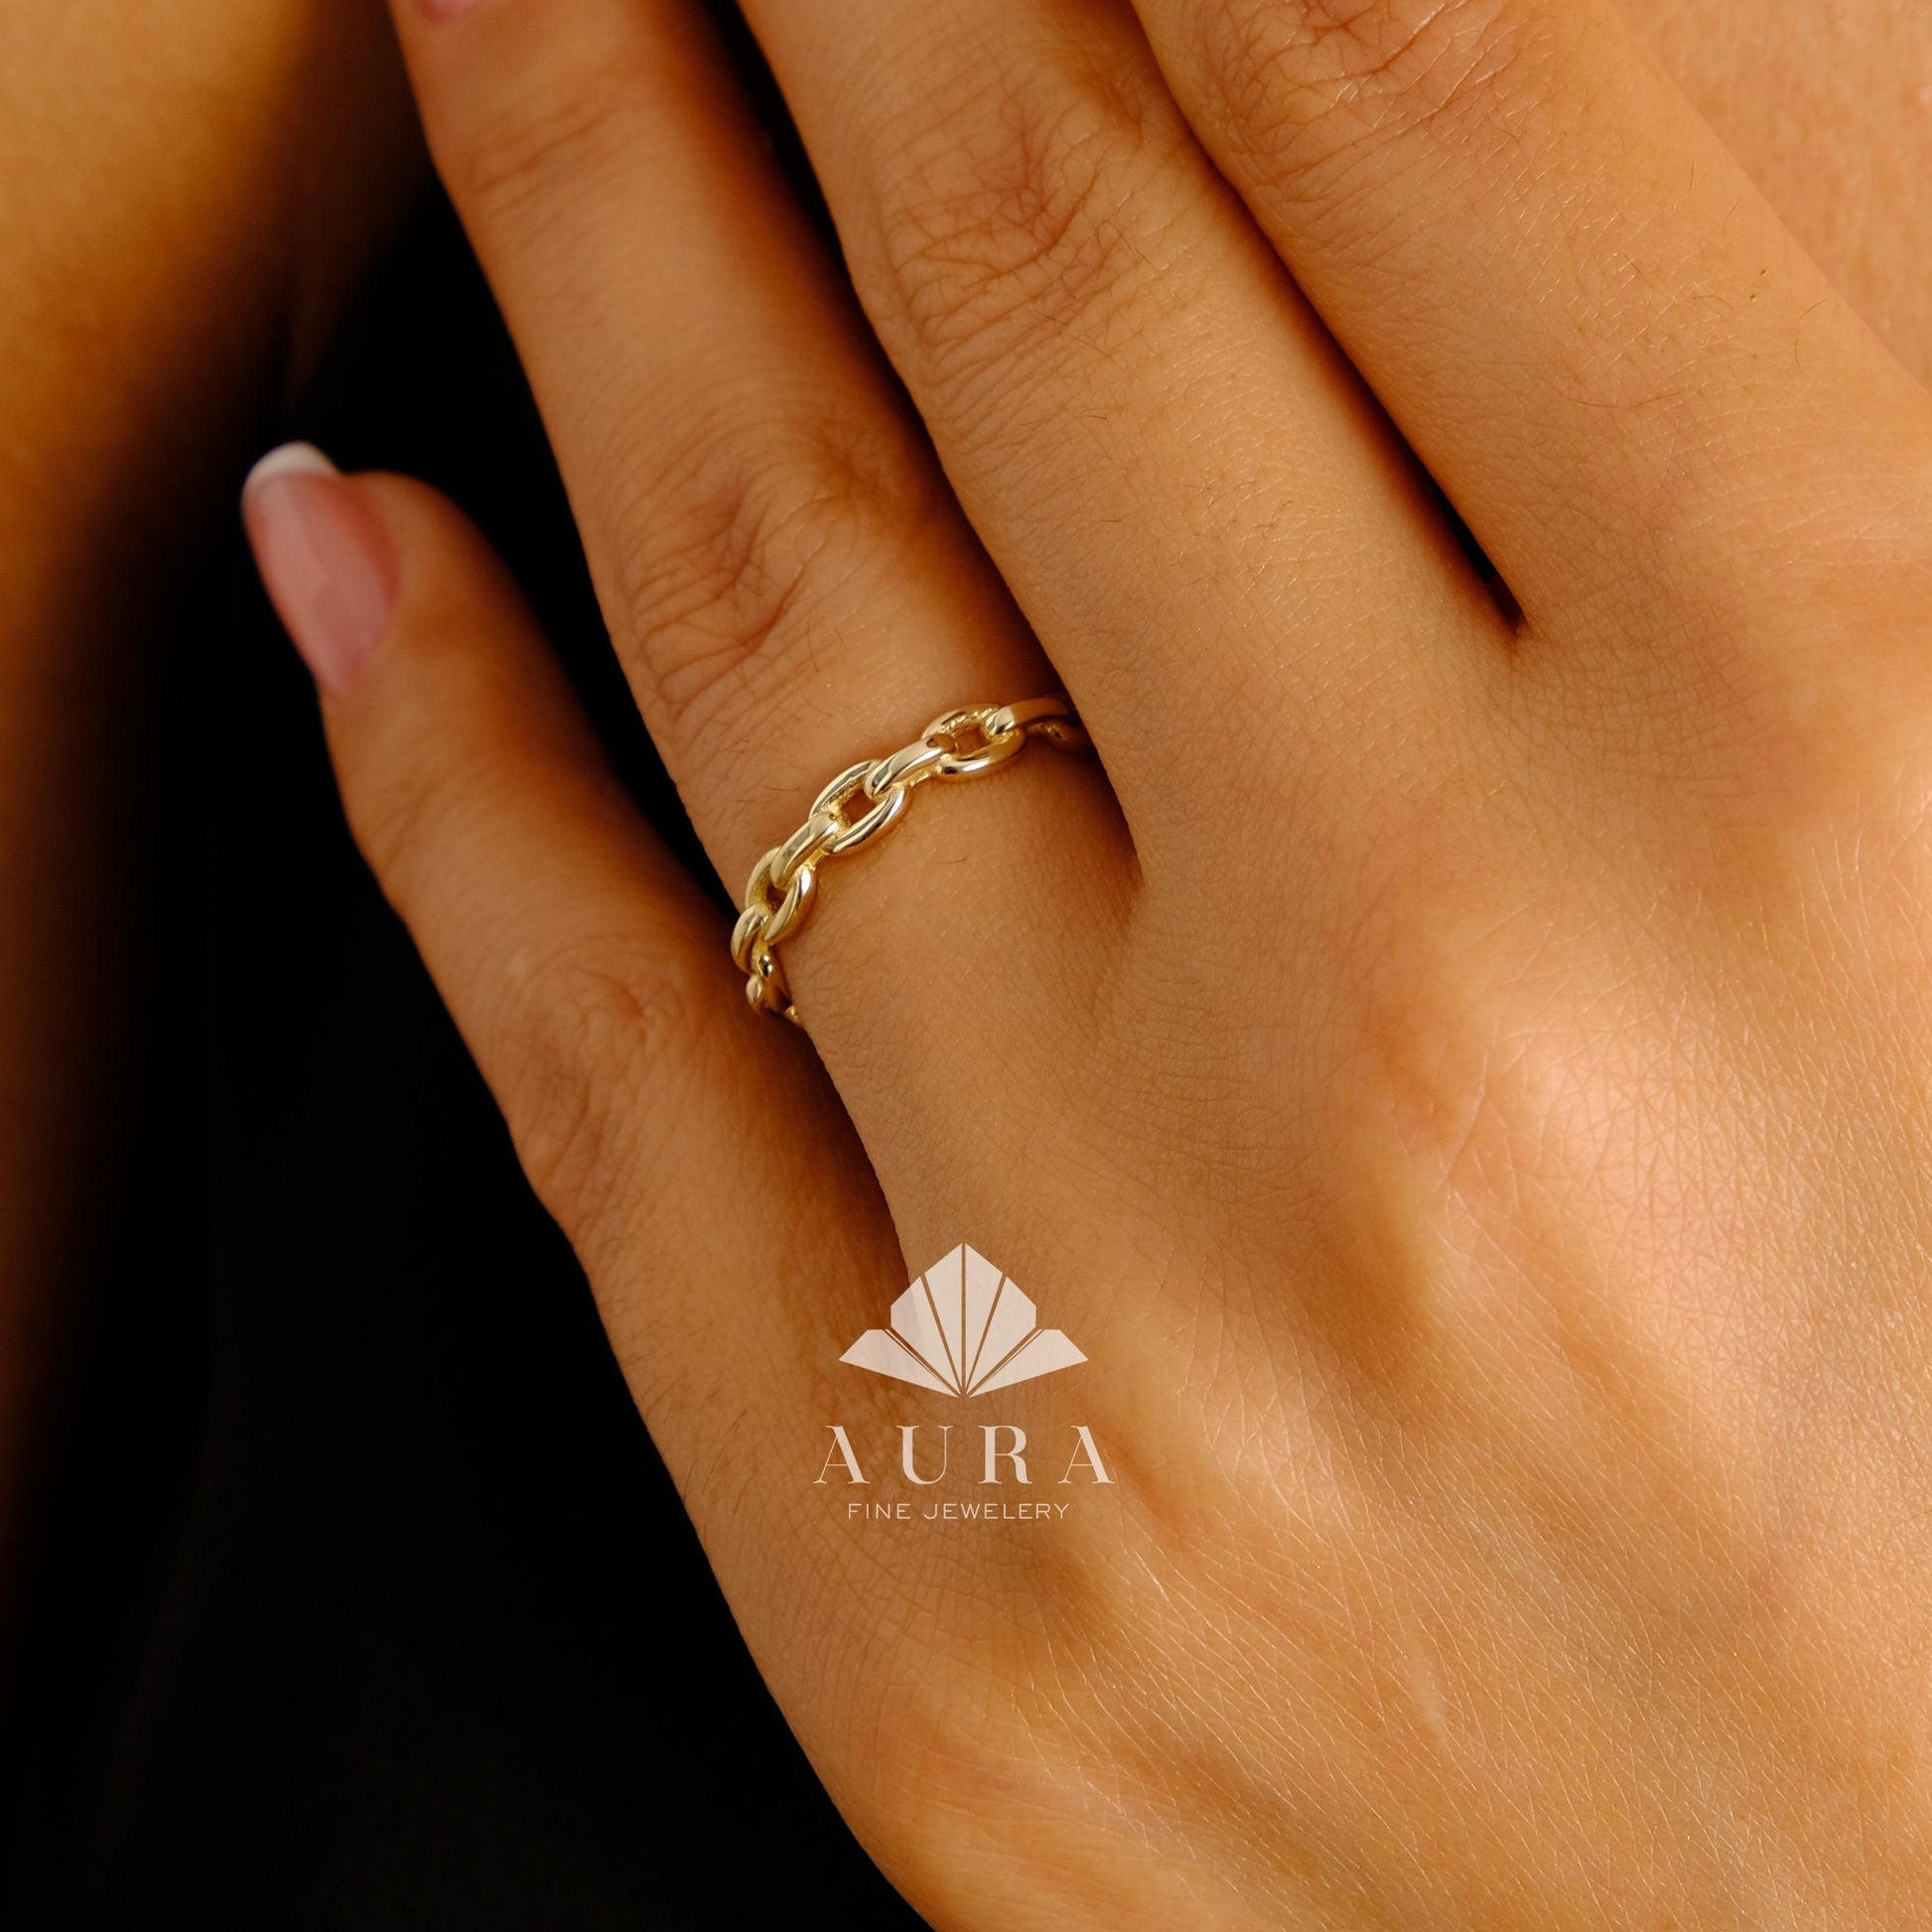 14K Gold Chain Ring, Paperclip Chain Wedding Ring, Dainty Gold Band, Curb Chain Link Ring, Pointer Finger Ring, Ladies Unique Wedding Band